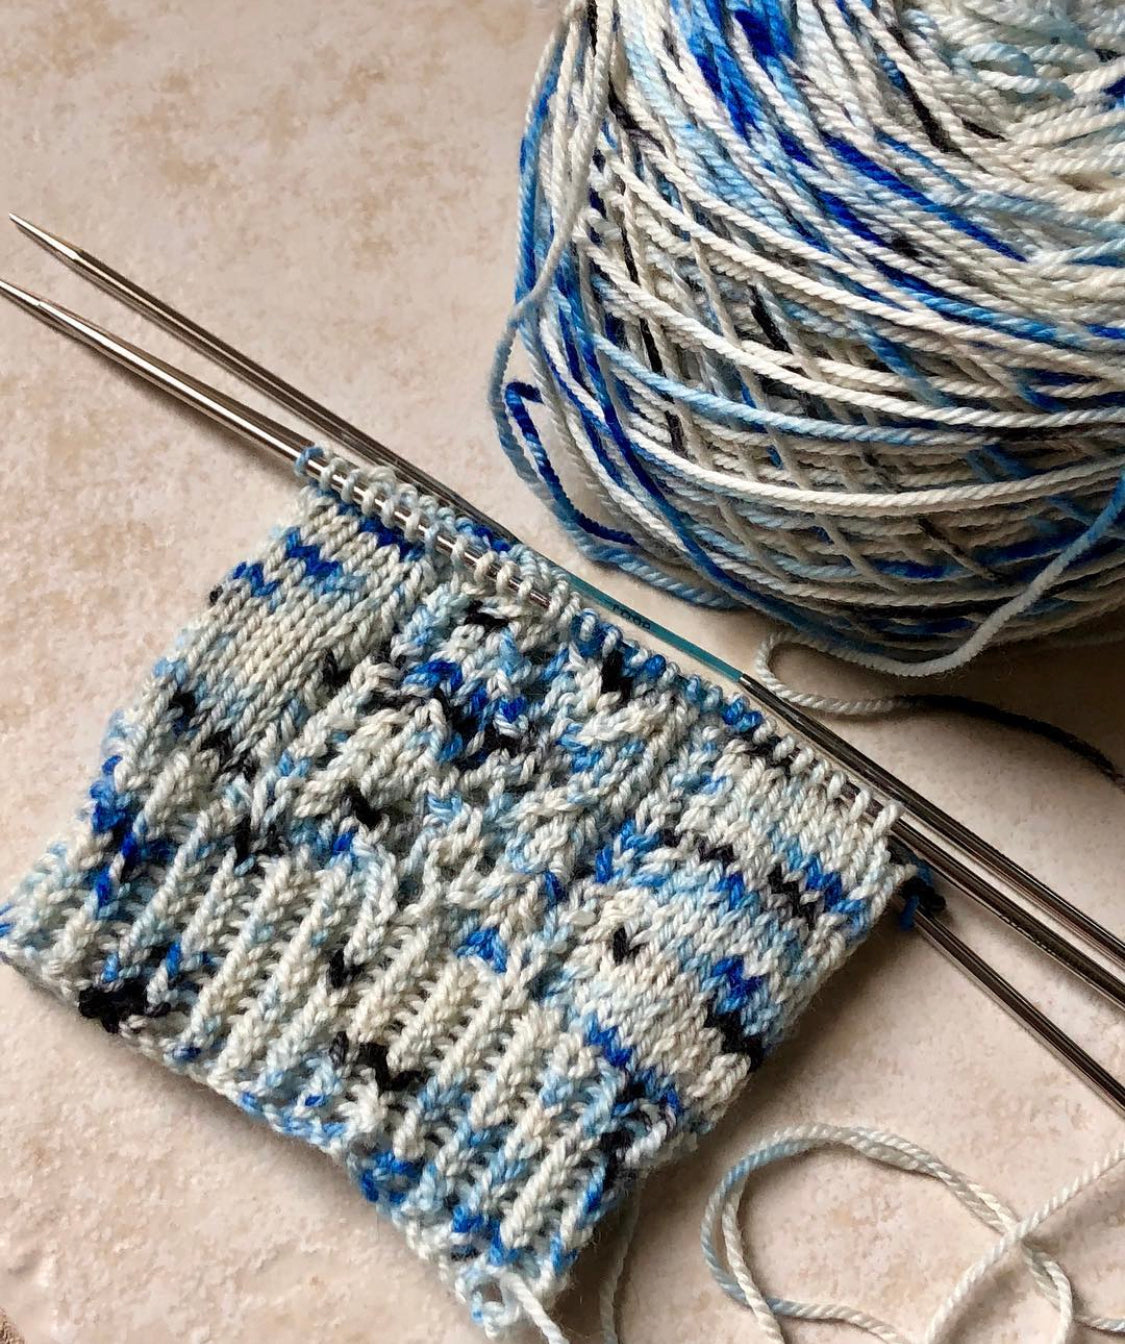 How to Knit with Circular Knitting Needles